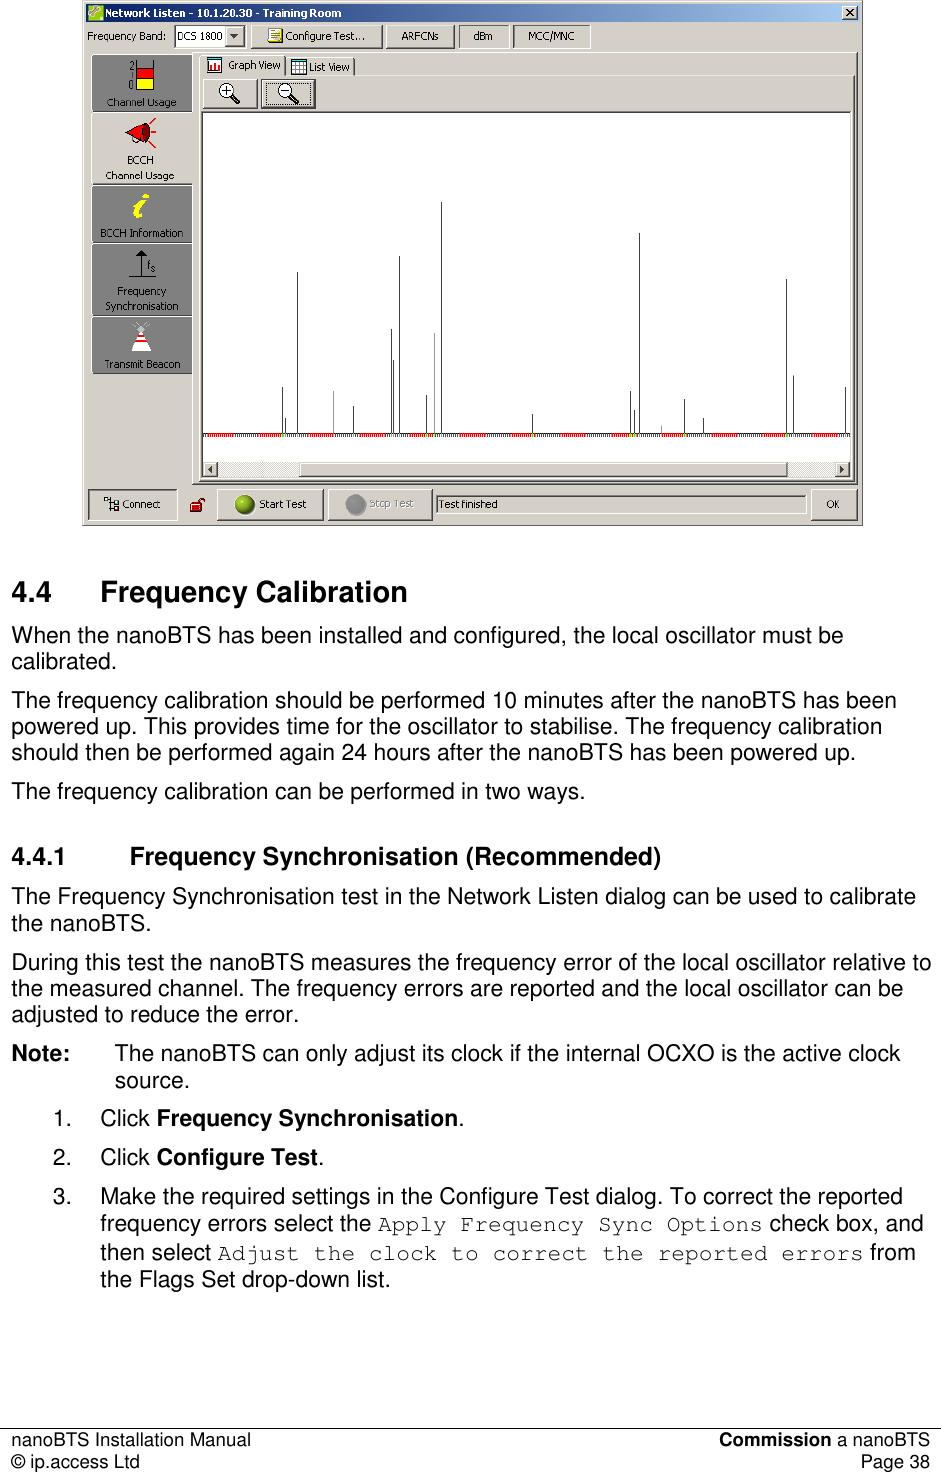 nanoBTS Installation Manual  Commission a nanoBTS © ip.access Ltd  Page 38   4.4  Frequency Calibration When the nanoBTS has been installed and configured, the local oscillator must be calibrated.  The frequency calibration should be performed 10 minutes after the nanoBTS has been powered up. This provides time for the oscillator to stabilise. The frequency calibration should then be performed again 24 hours after the nanoBTS has been powered up. The frequency calibration can be performed in two ways. 4.4.1  Frequency Synchronisation (Recommended) The Frequency Synchronisation test in the Network Listen dialog can be used to calibrate the nanoBTS. During this test the nanoBTS measures the frequency error of the local oscillator relative to the measured channel. The frequency errors are reported and the local oscillator can be adjusted to reduce the error. Note:  The nanoBTS can only adjust its clock if the internal OCXO is the active clock source. 1.  Click Frequency Synchronisation. 2.  Click Configure Test. 3.  Make the required settings in the Configure Test dialog. To correct the reported frequency errors select the Apply Frequency Sync Options check box, and then select Adjust the clock to correct the reported errors from the Flags Set drop-down list. 